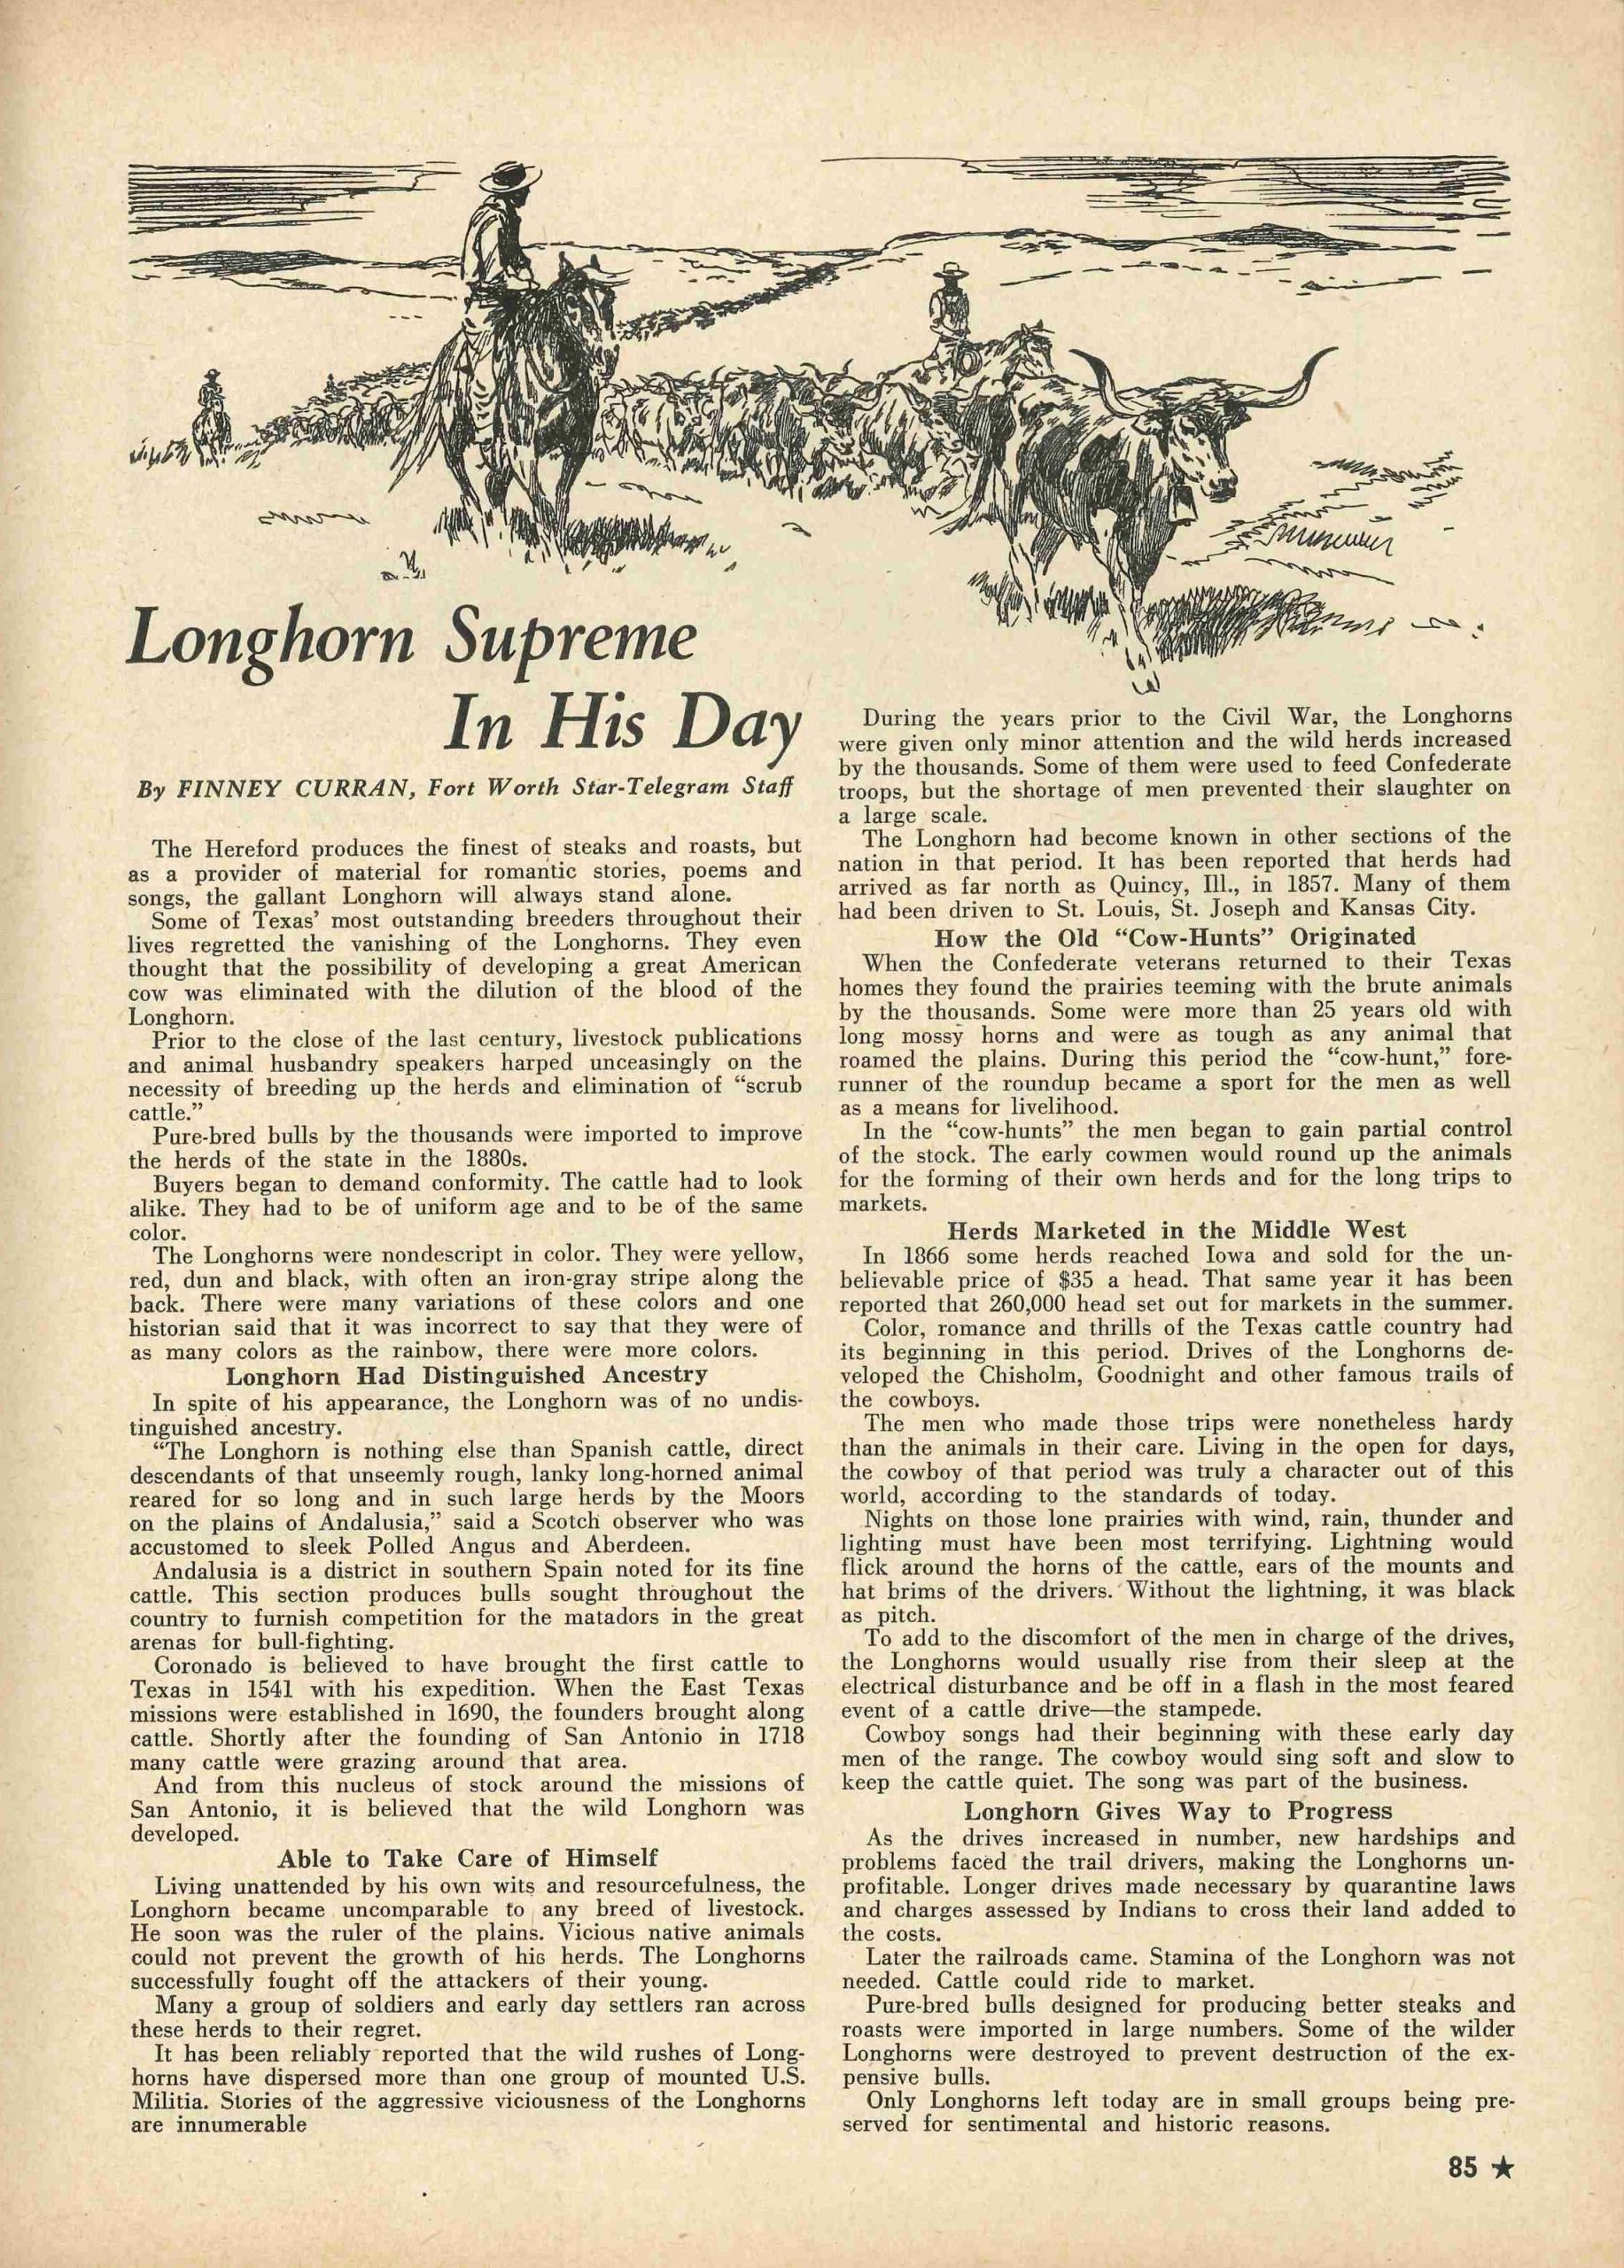 Page from stock show annual with an essay about longhorns